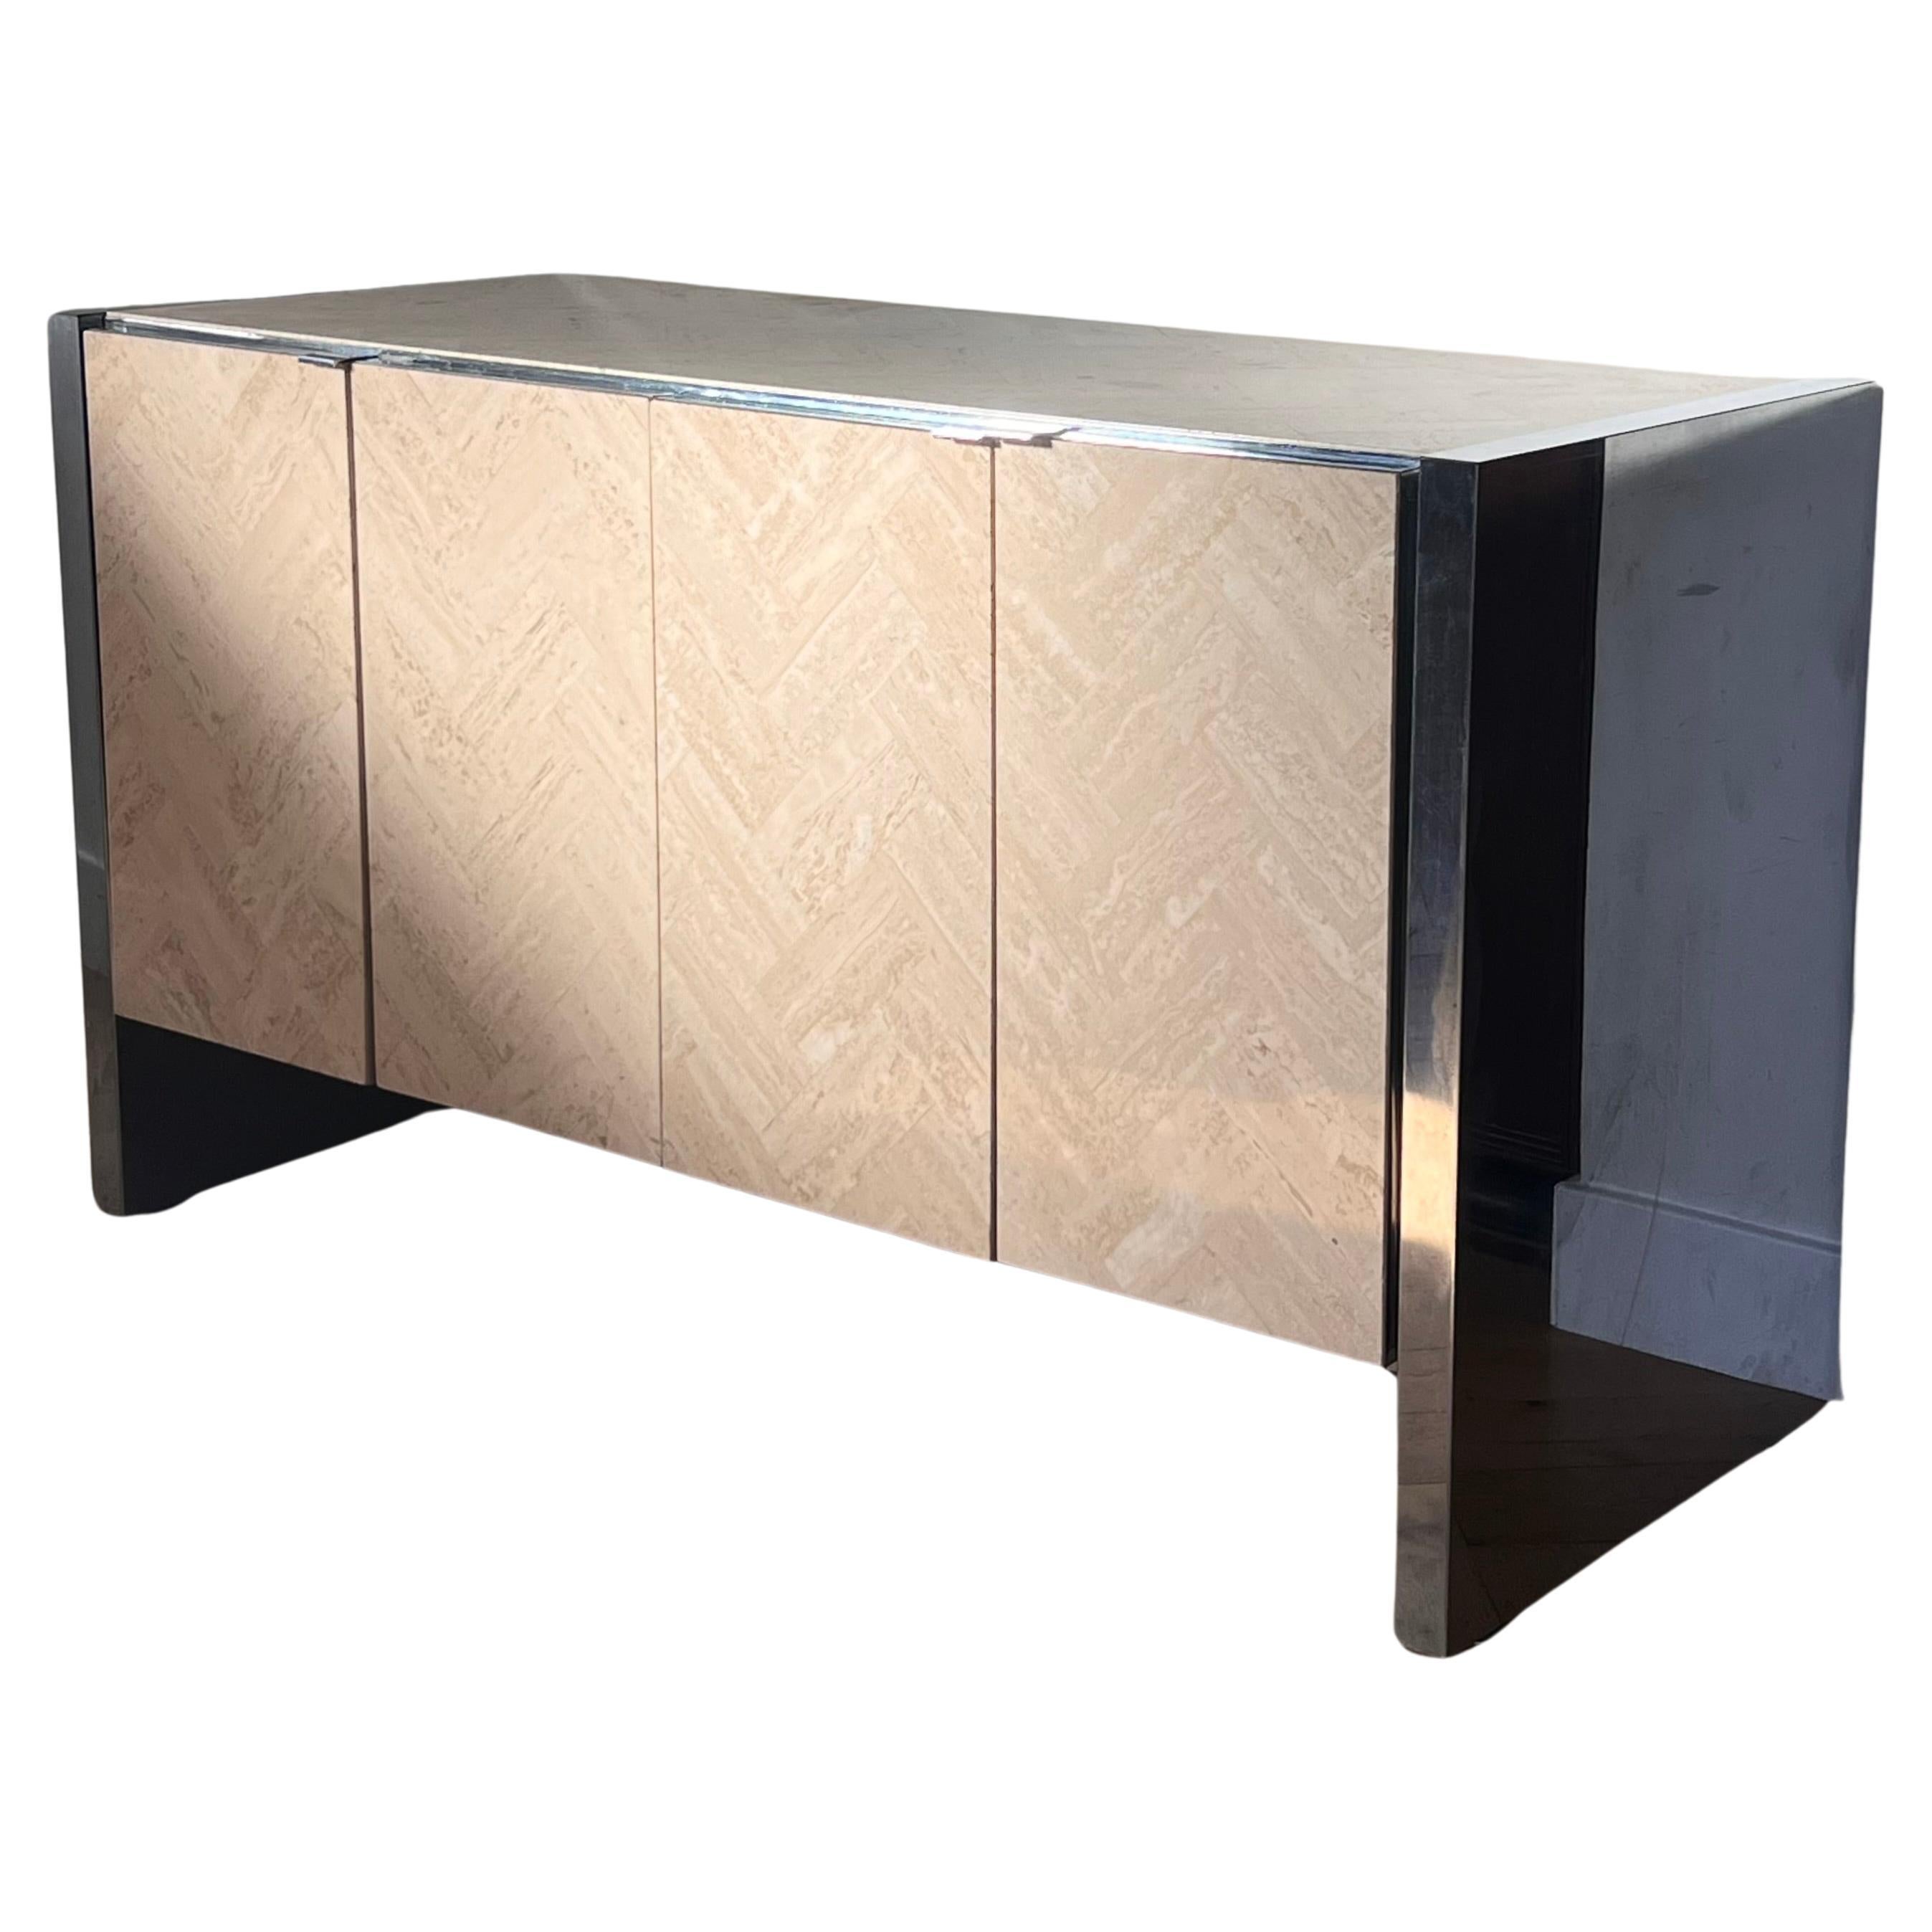 A very rare - and valuable - Italian travertine and chrome credenza by Ello Furniture, Italy circa 1970. This piece is pure Italian travertine with chrome sides, edging, and legs. The doors open outward to reveal clean interiors with multiple